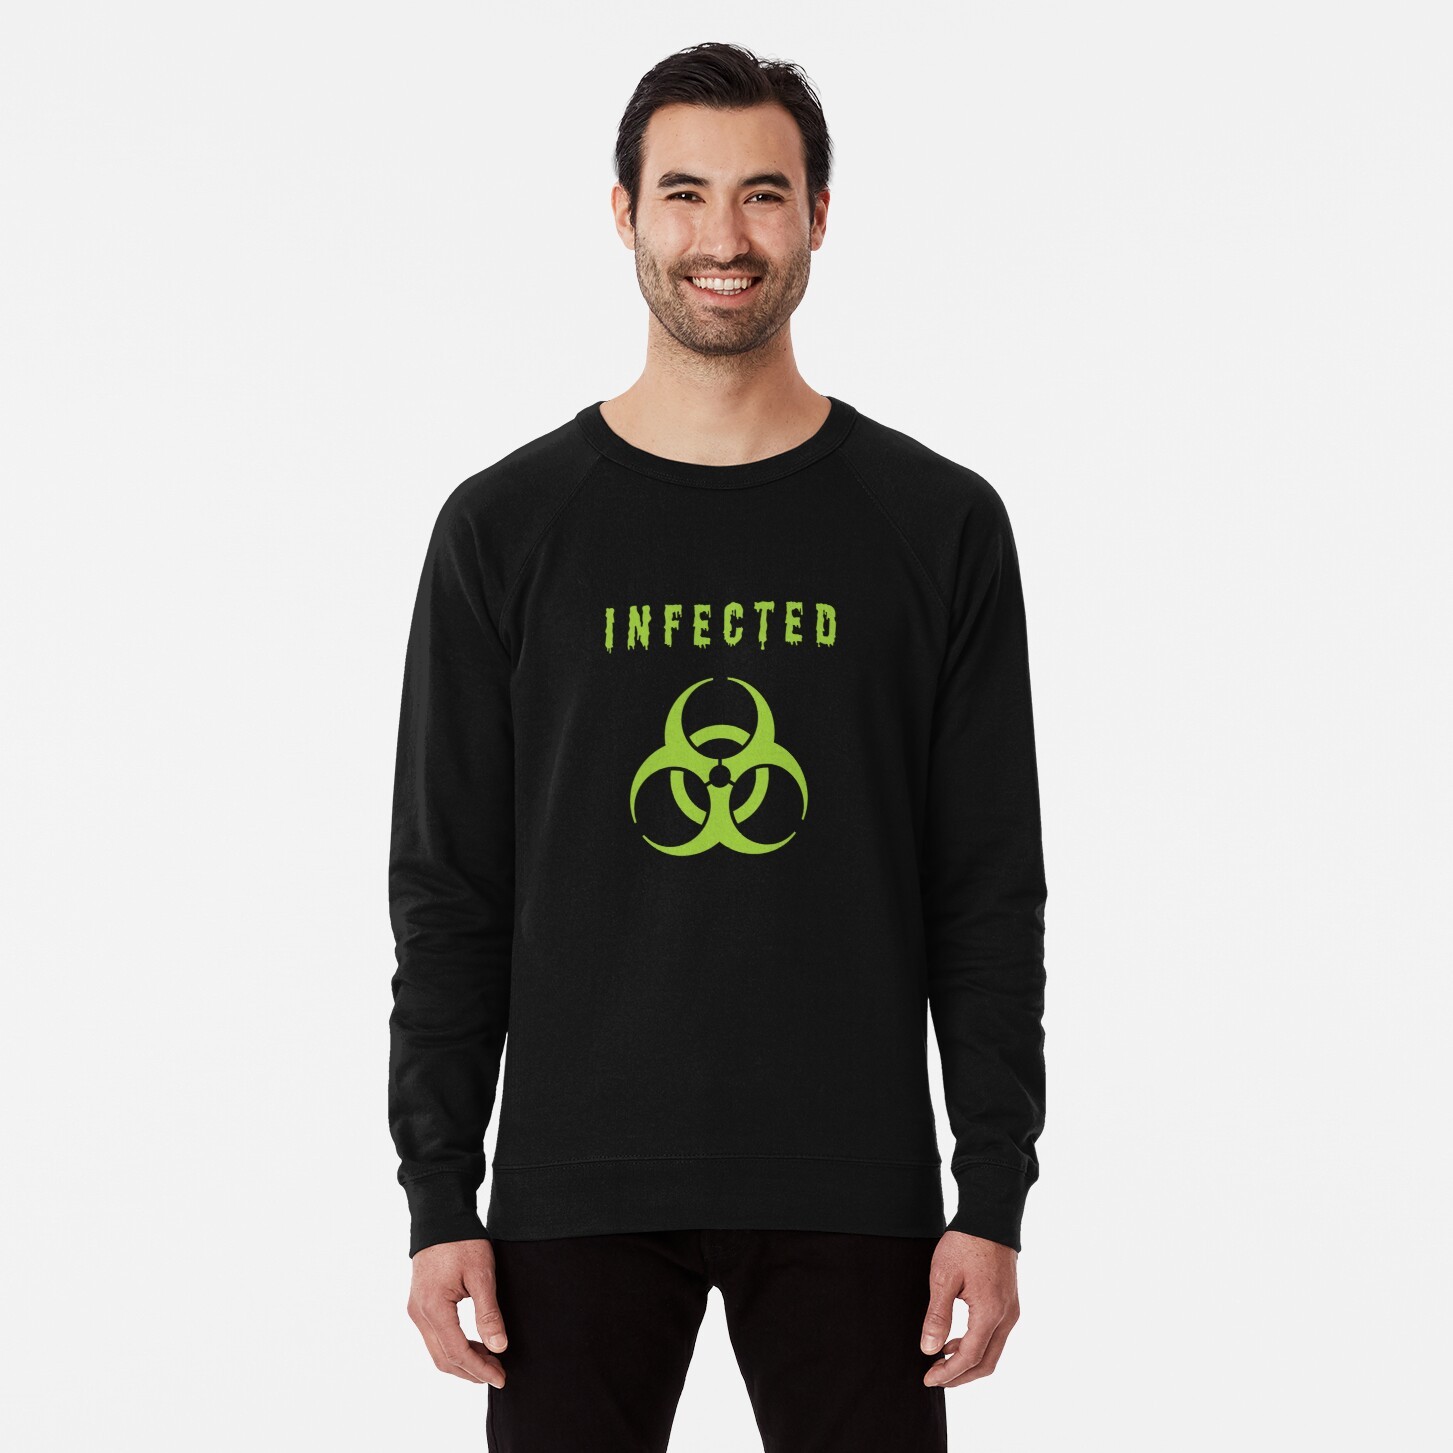 Infected - Let the world know to keep their distance - Lightweight sweatshirt - 